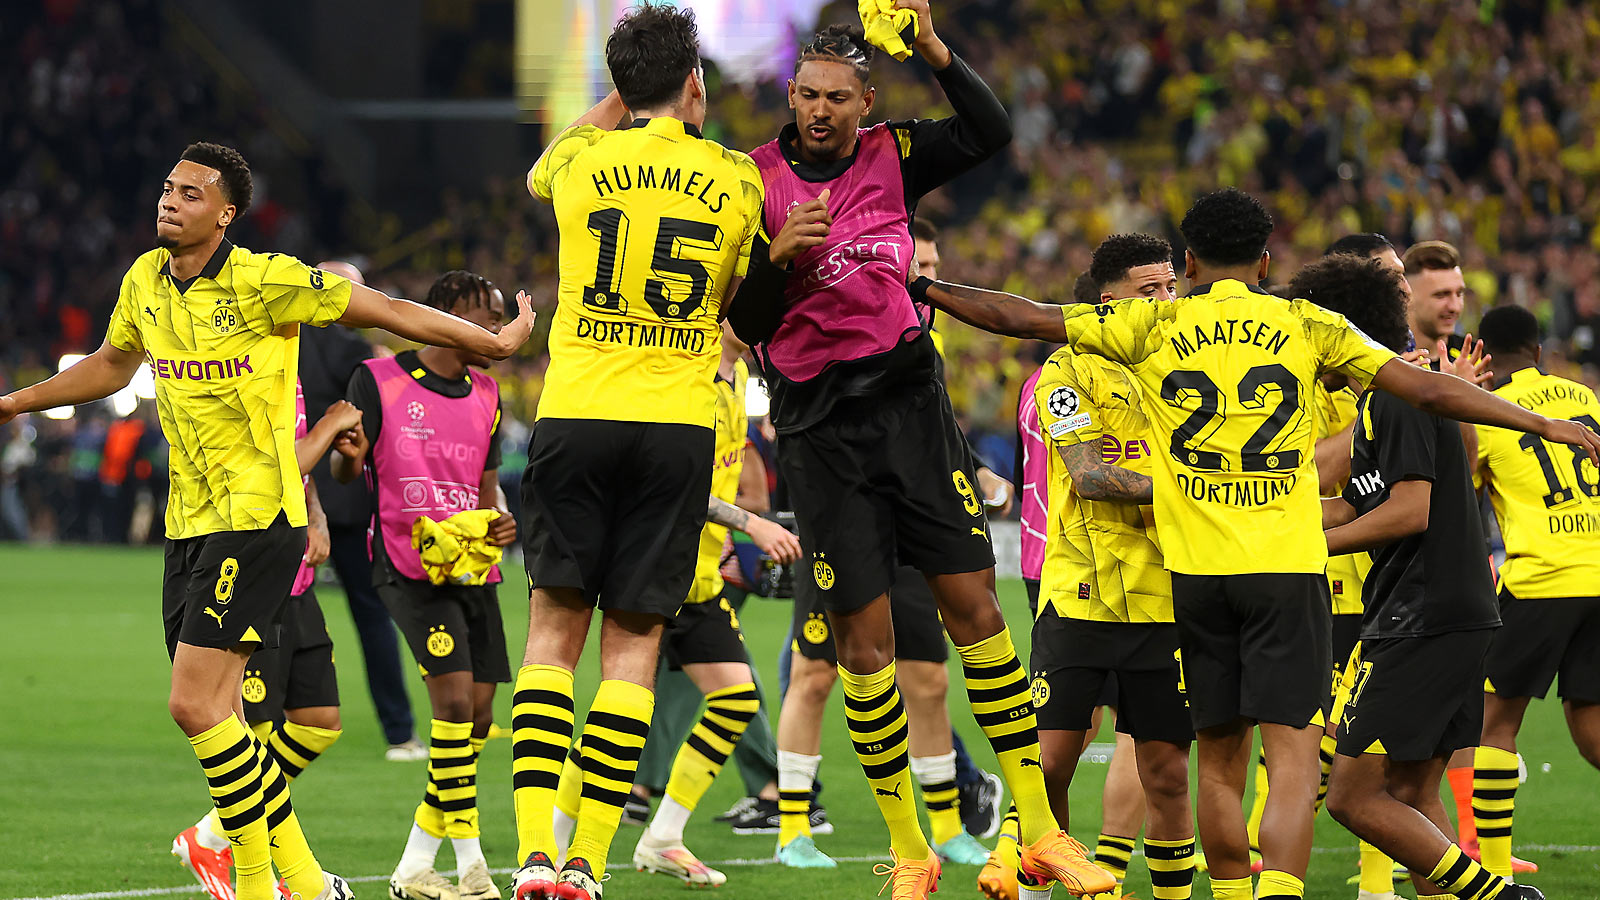 “We want to go to Wembley!”  Victory against PSG!  BVB shows its CL face